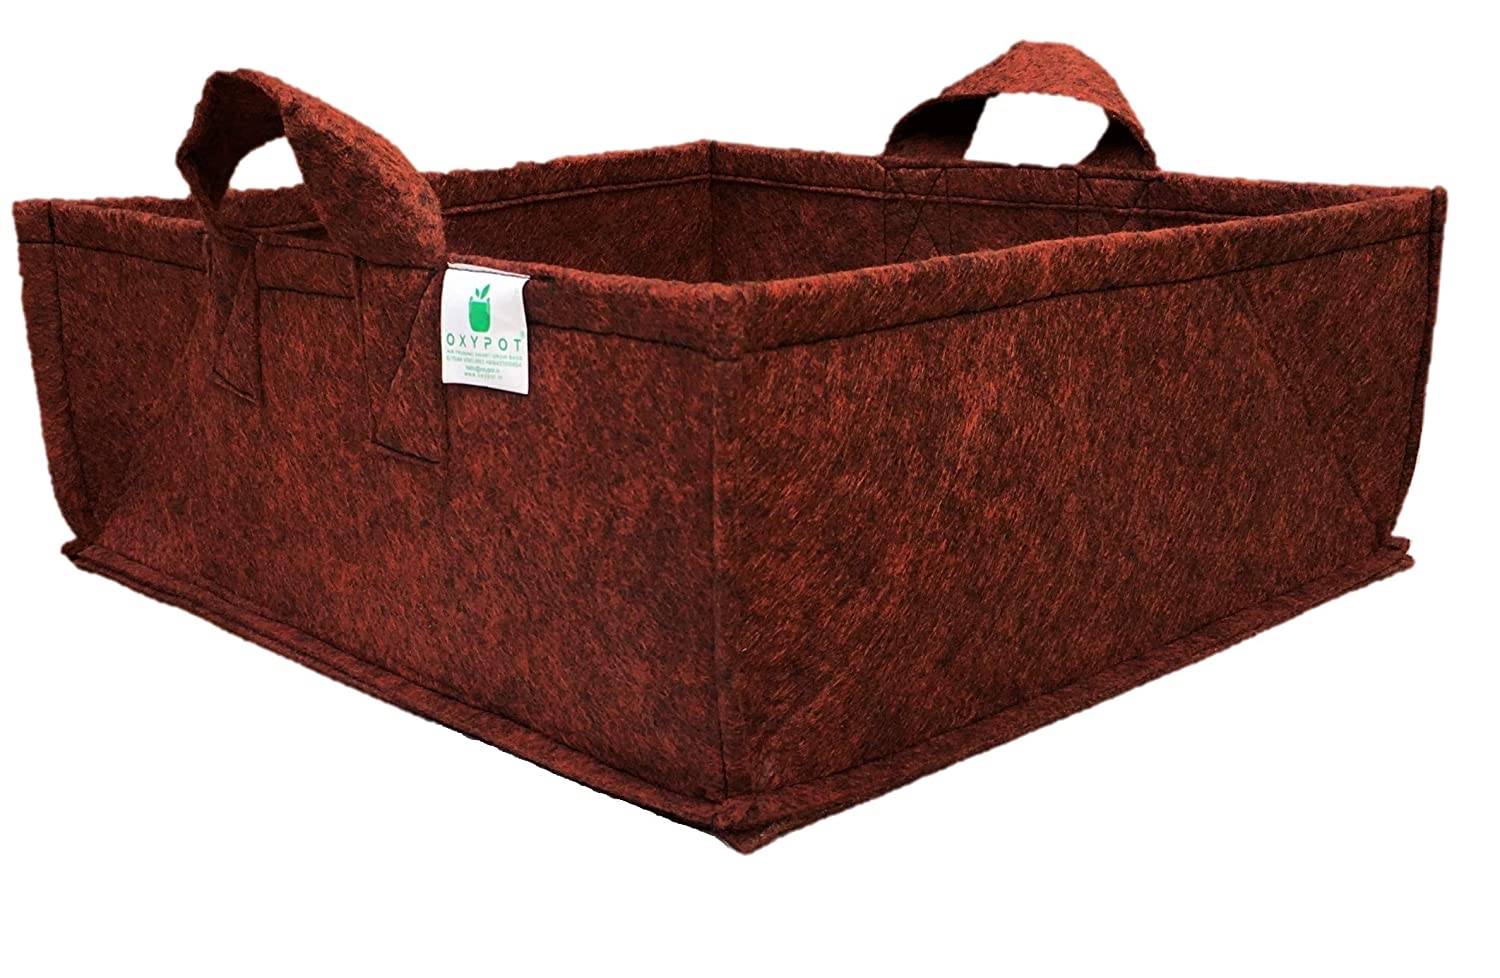 Oxypot Geo Fabric Grow Bags ,16 X 16 X 6 Inches, Maroon- Pack of 2